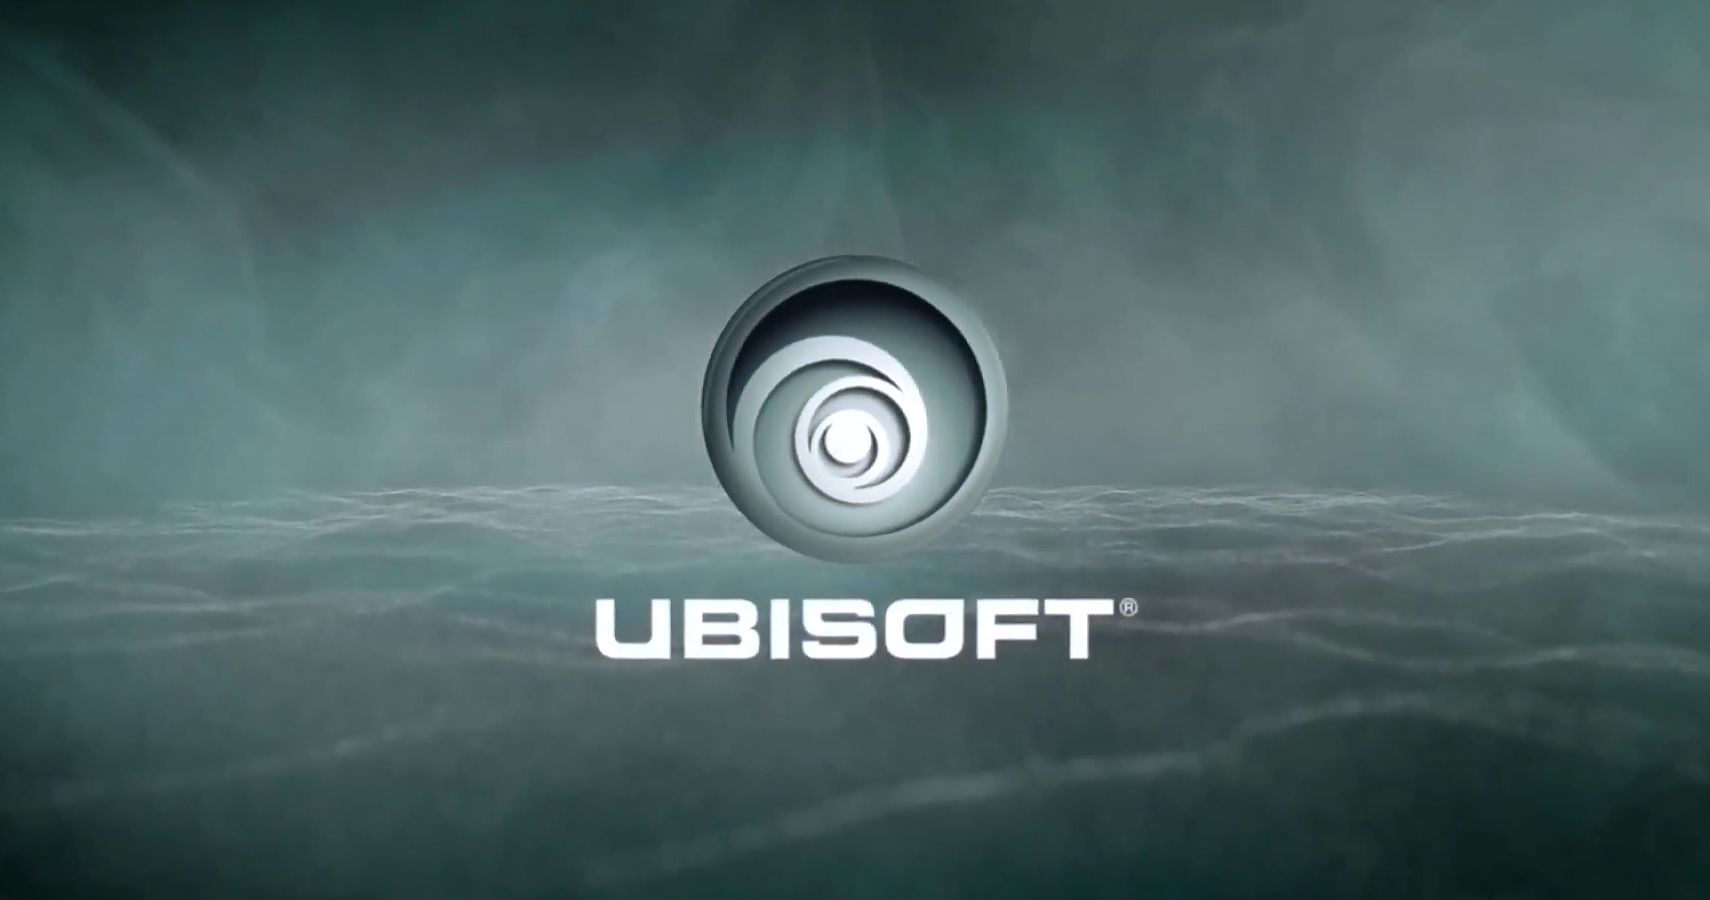 Ubisoft Wont Raise Game Prices This Holiday But May Do So Next Year